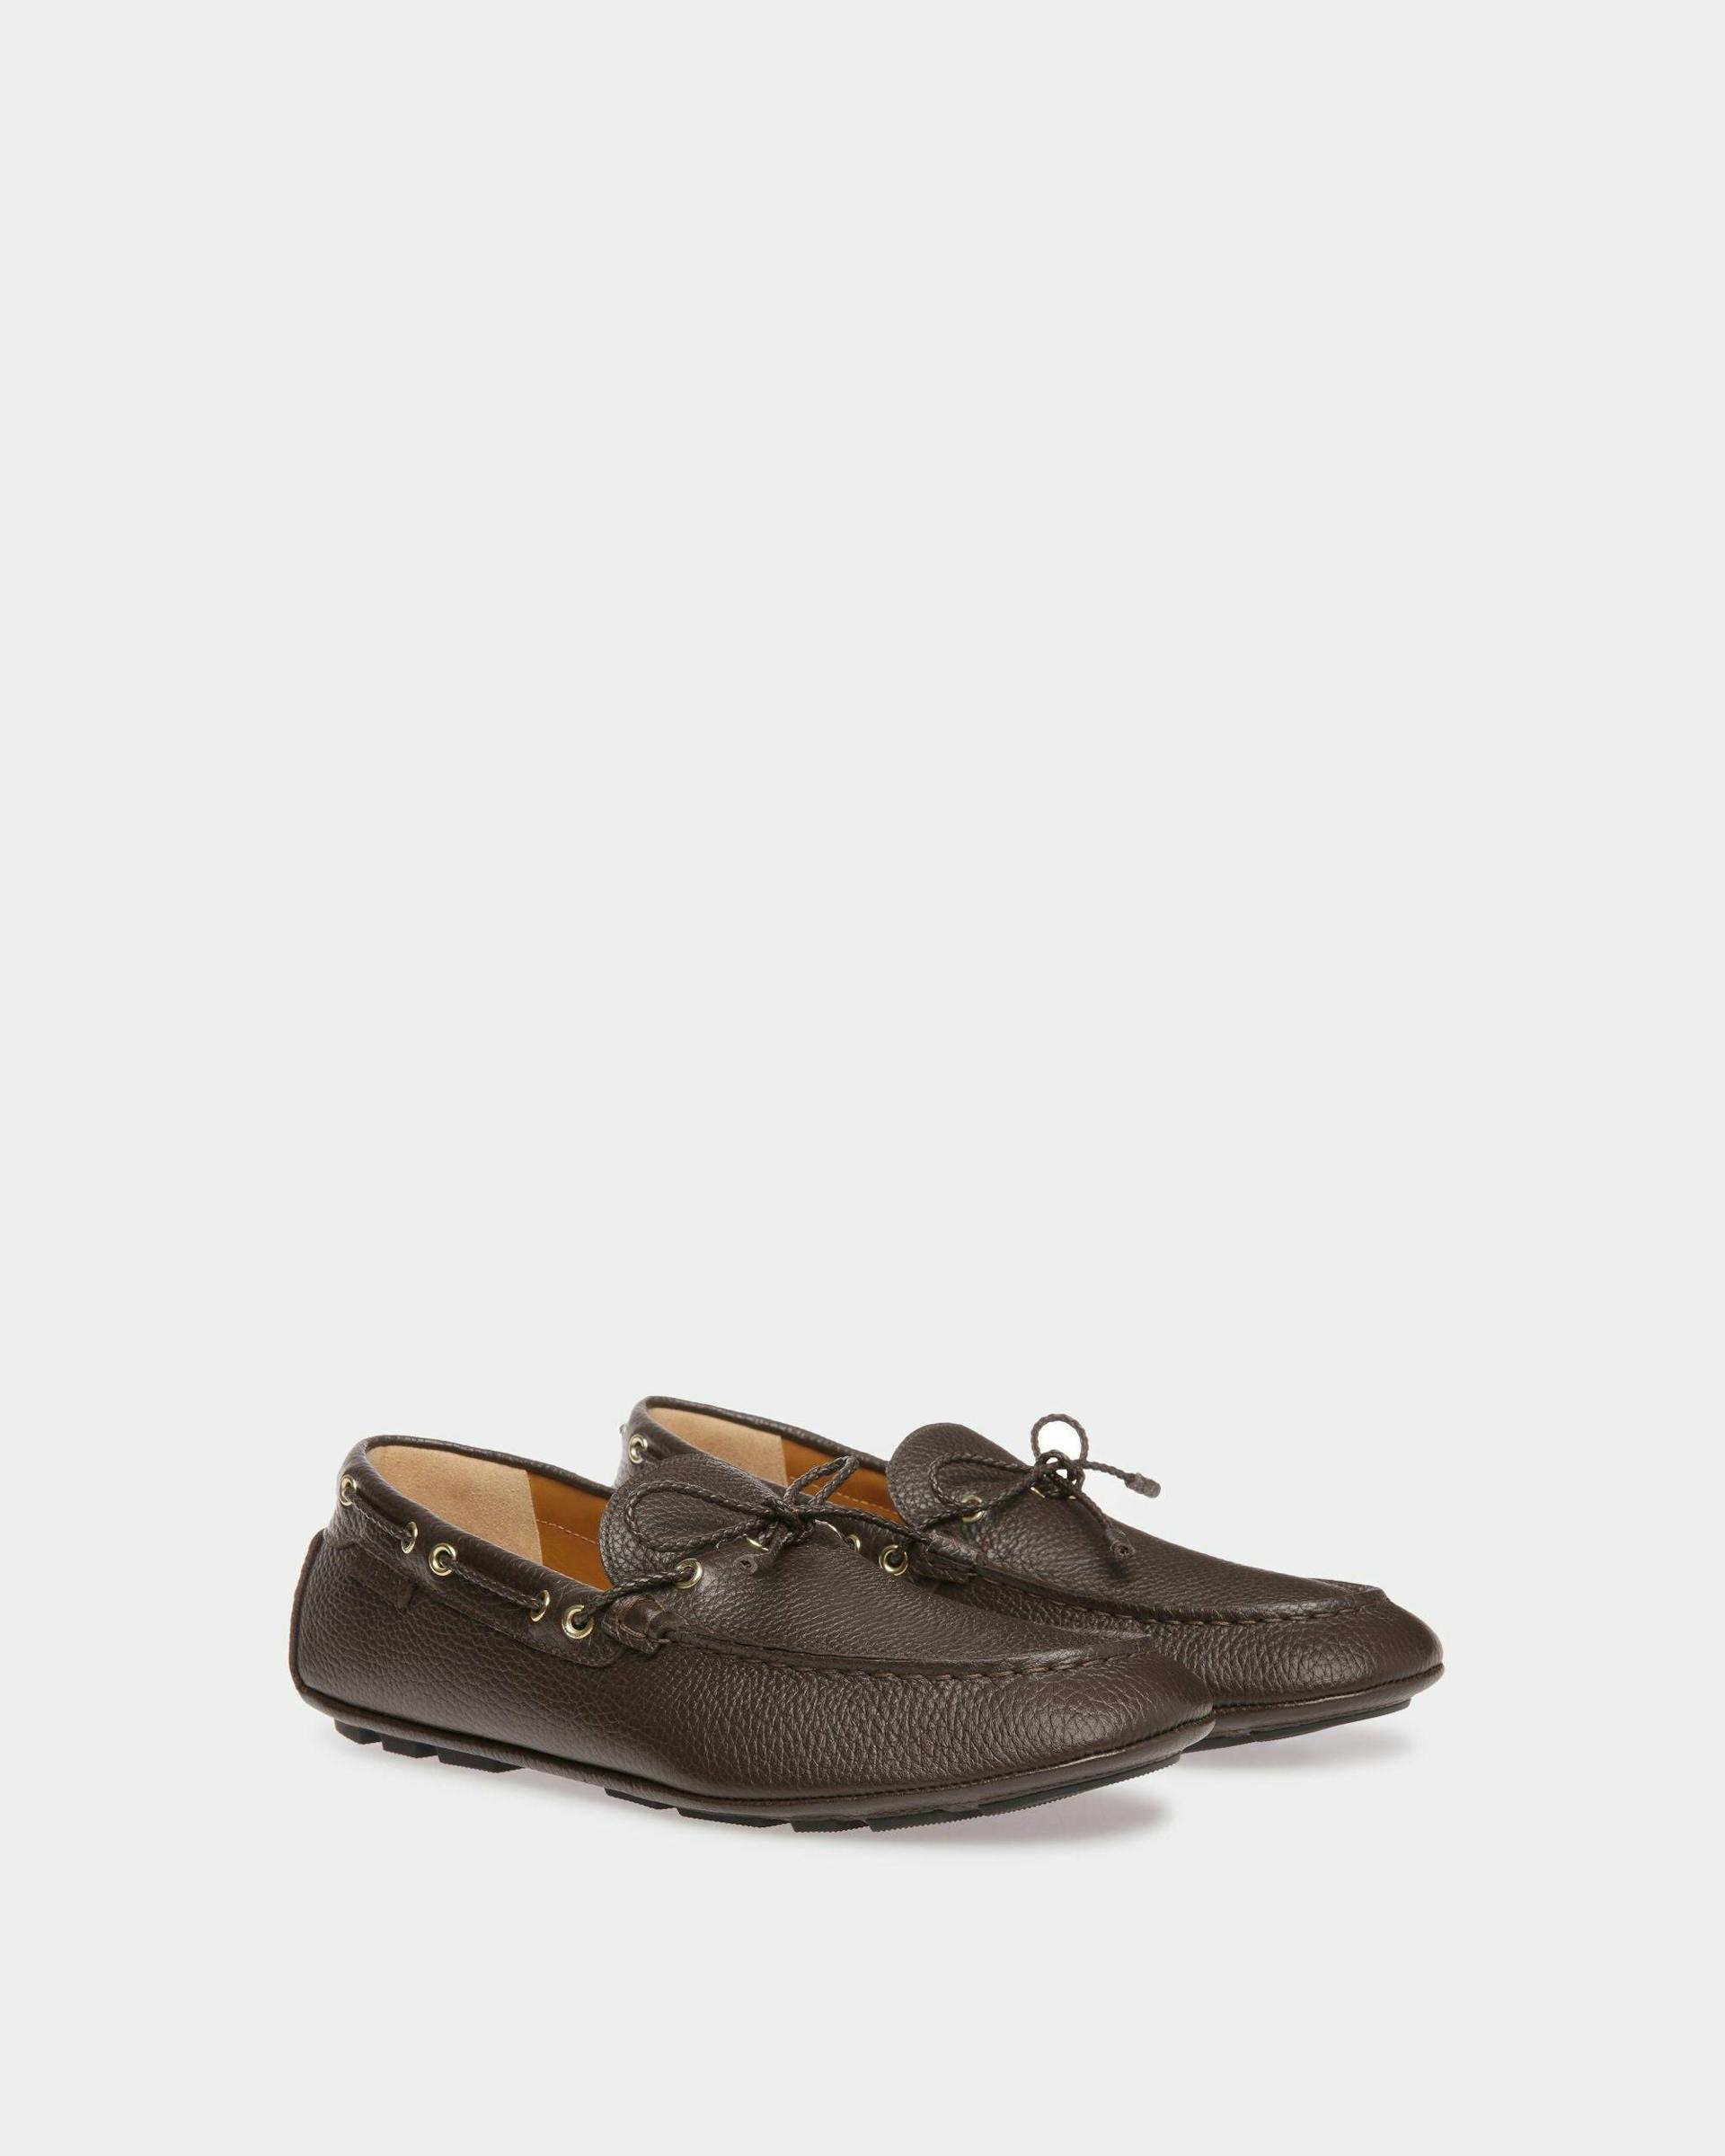 Men's Kerbs Drivers In Brown Leather | Bally | Still Life 3/4 Front